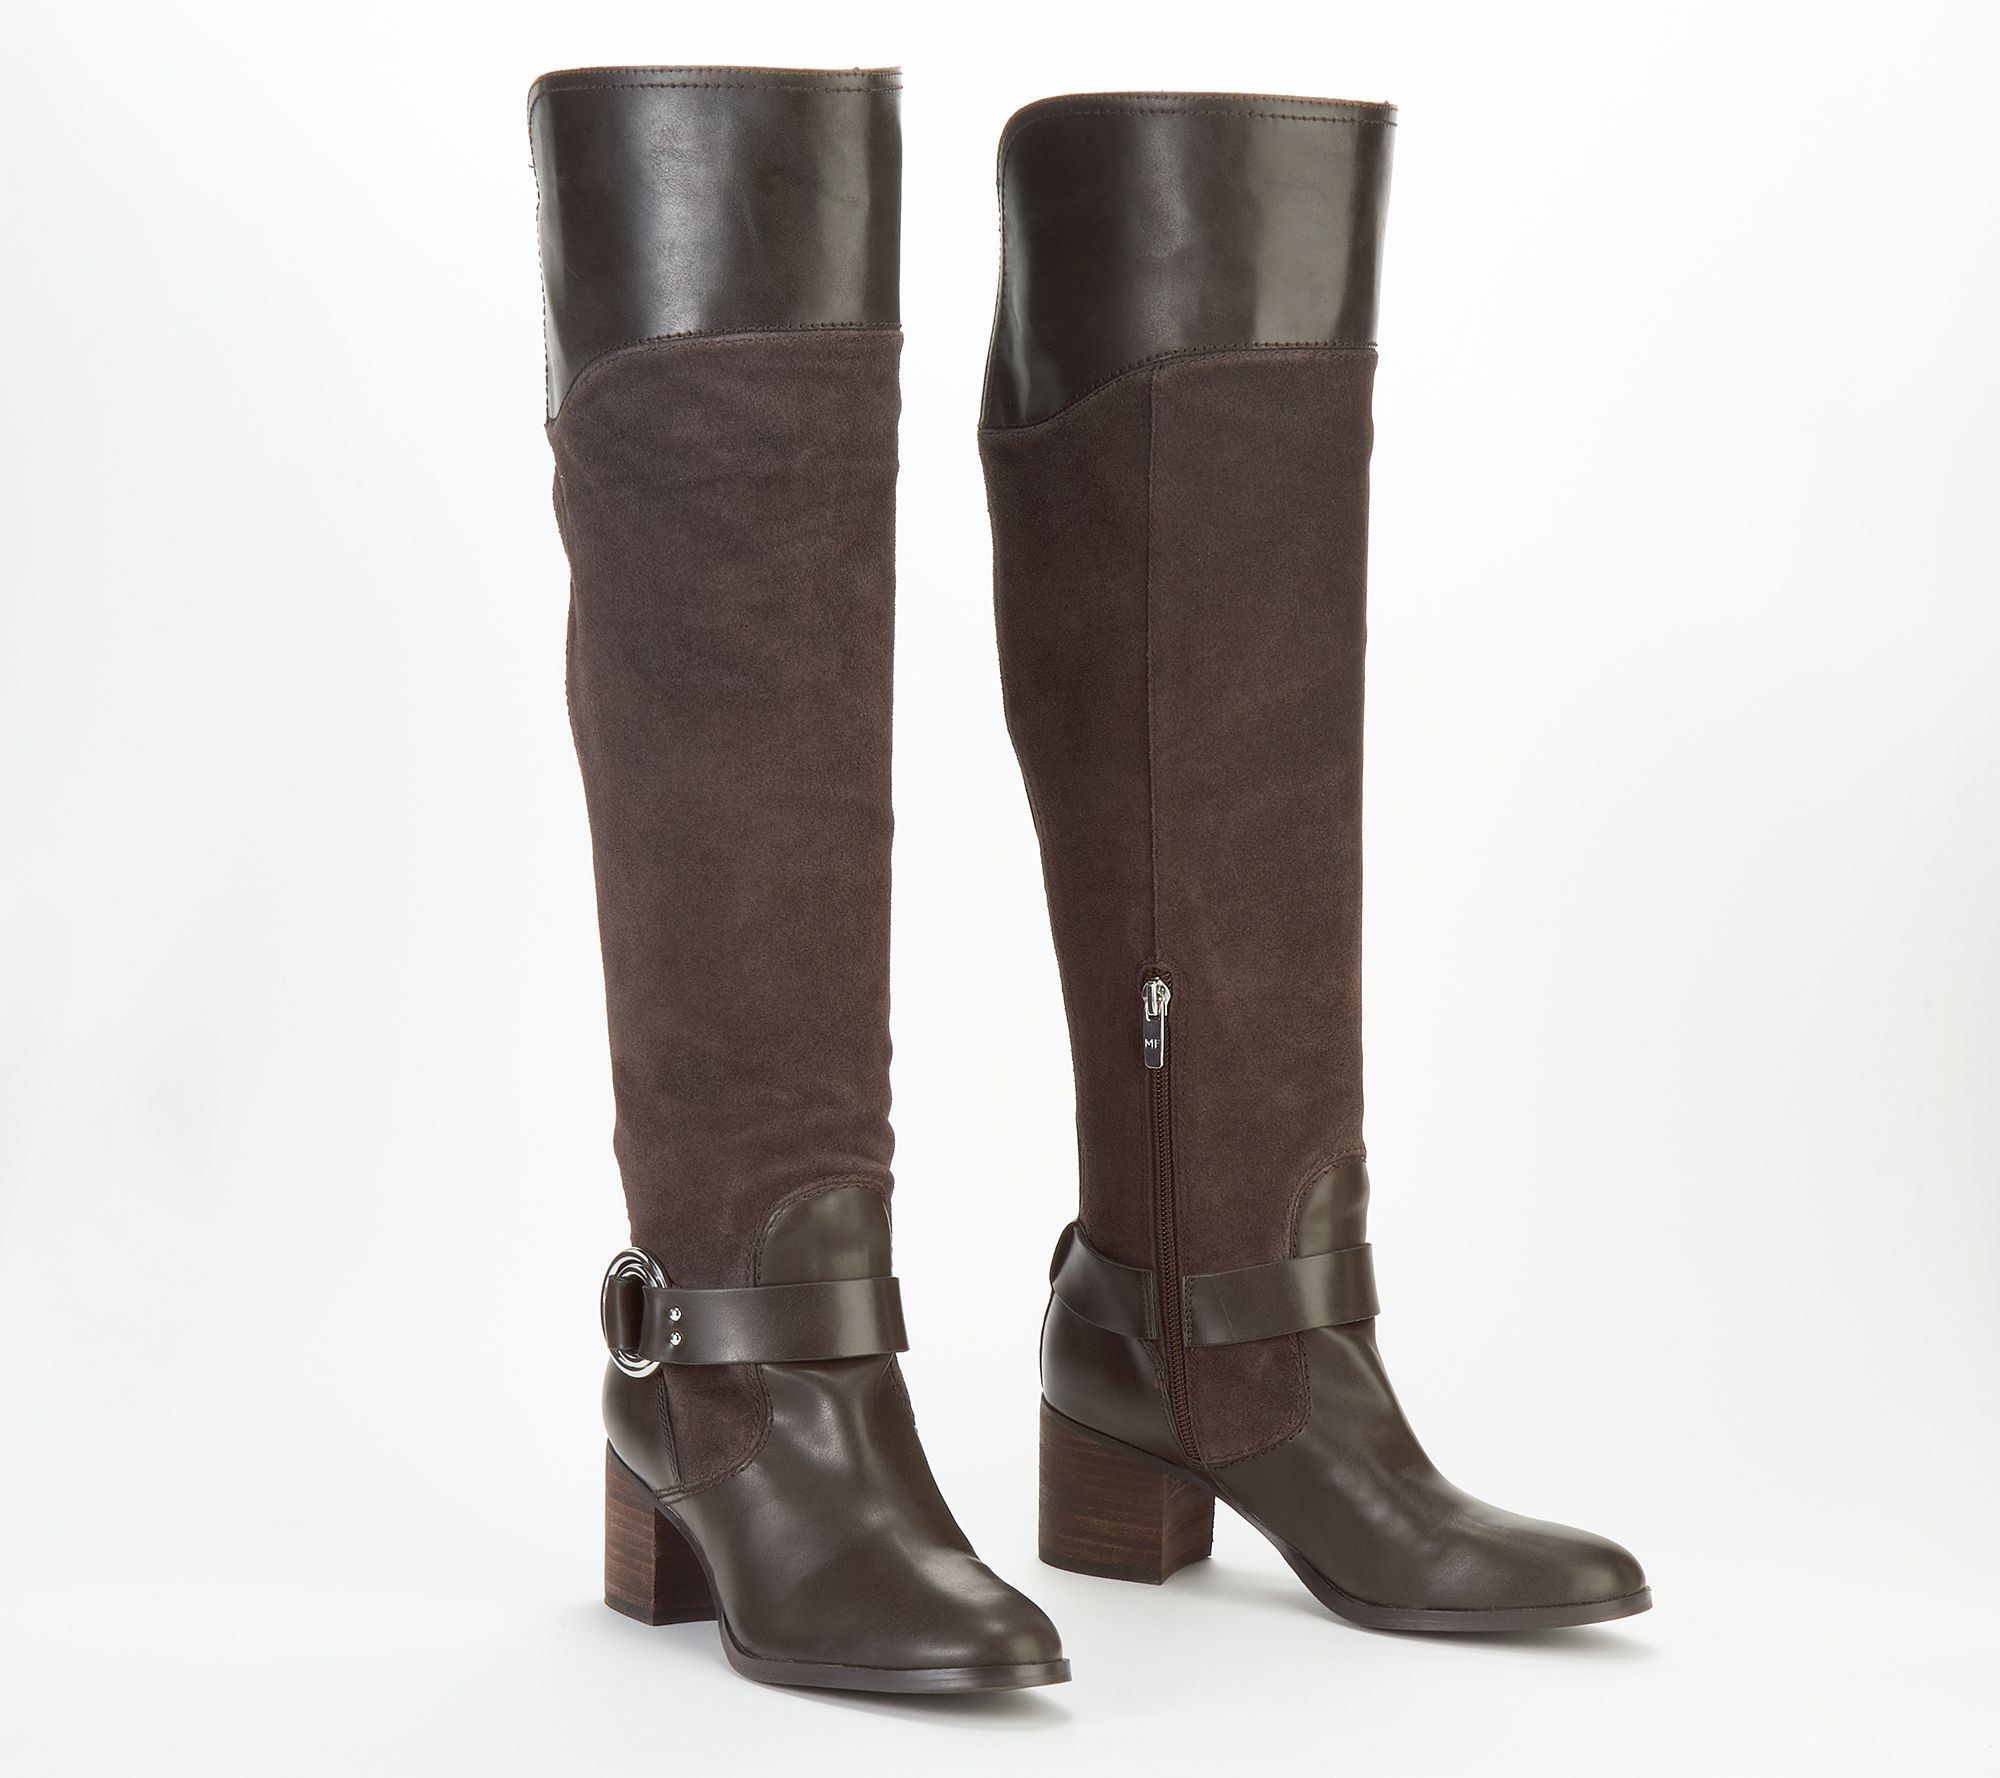 over the knee riding boots wide calf